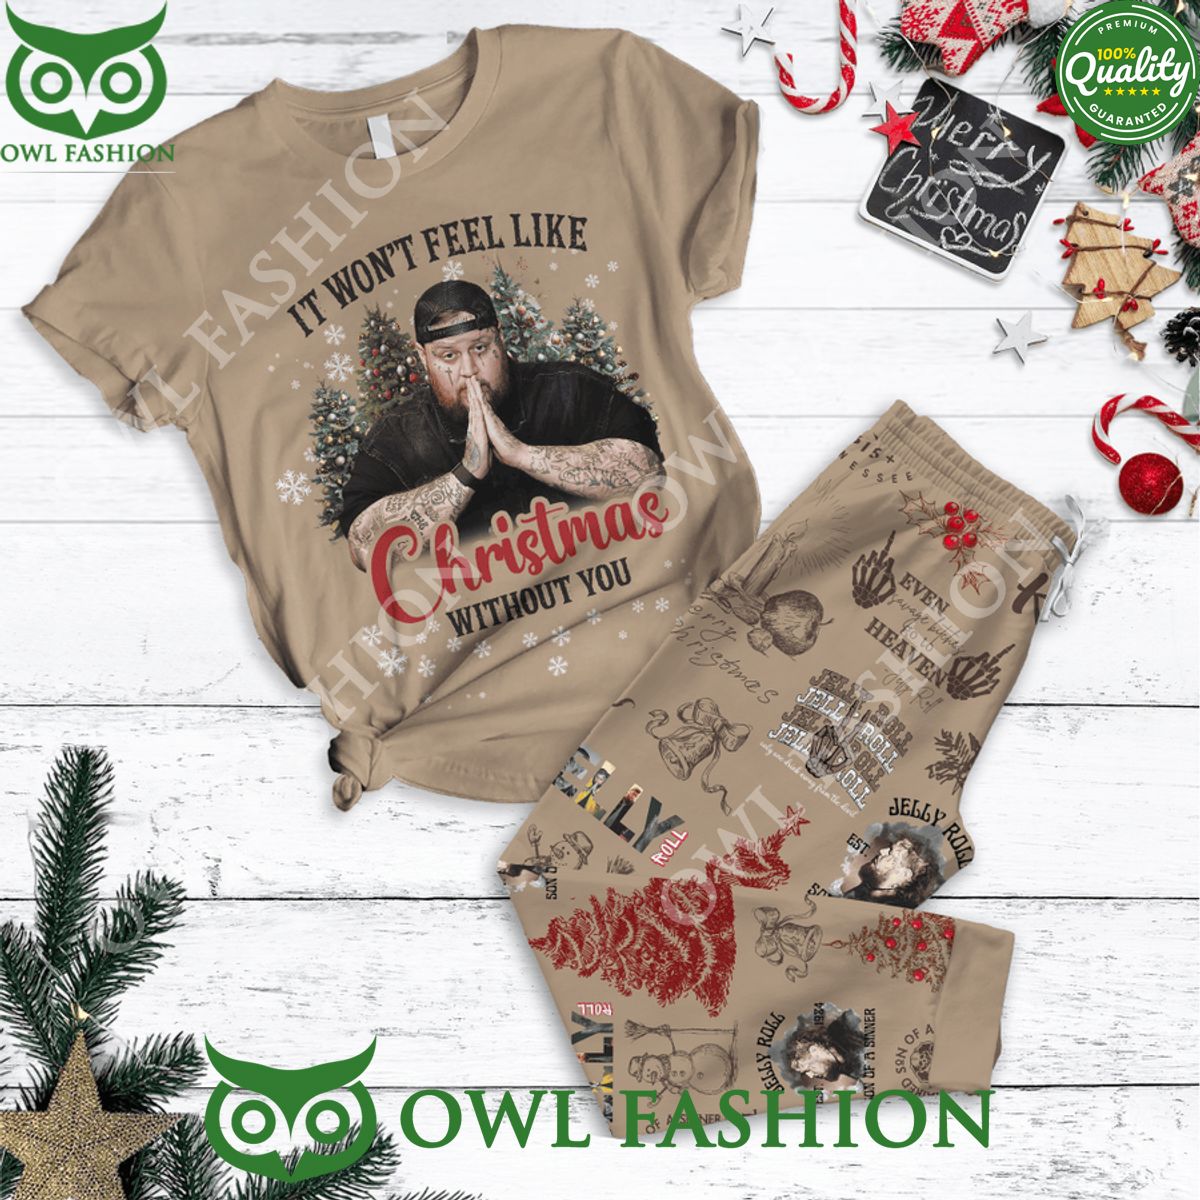 Feel like Jelly Roll without you Christmas Pajamas Set Wow! This is gracious